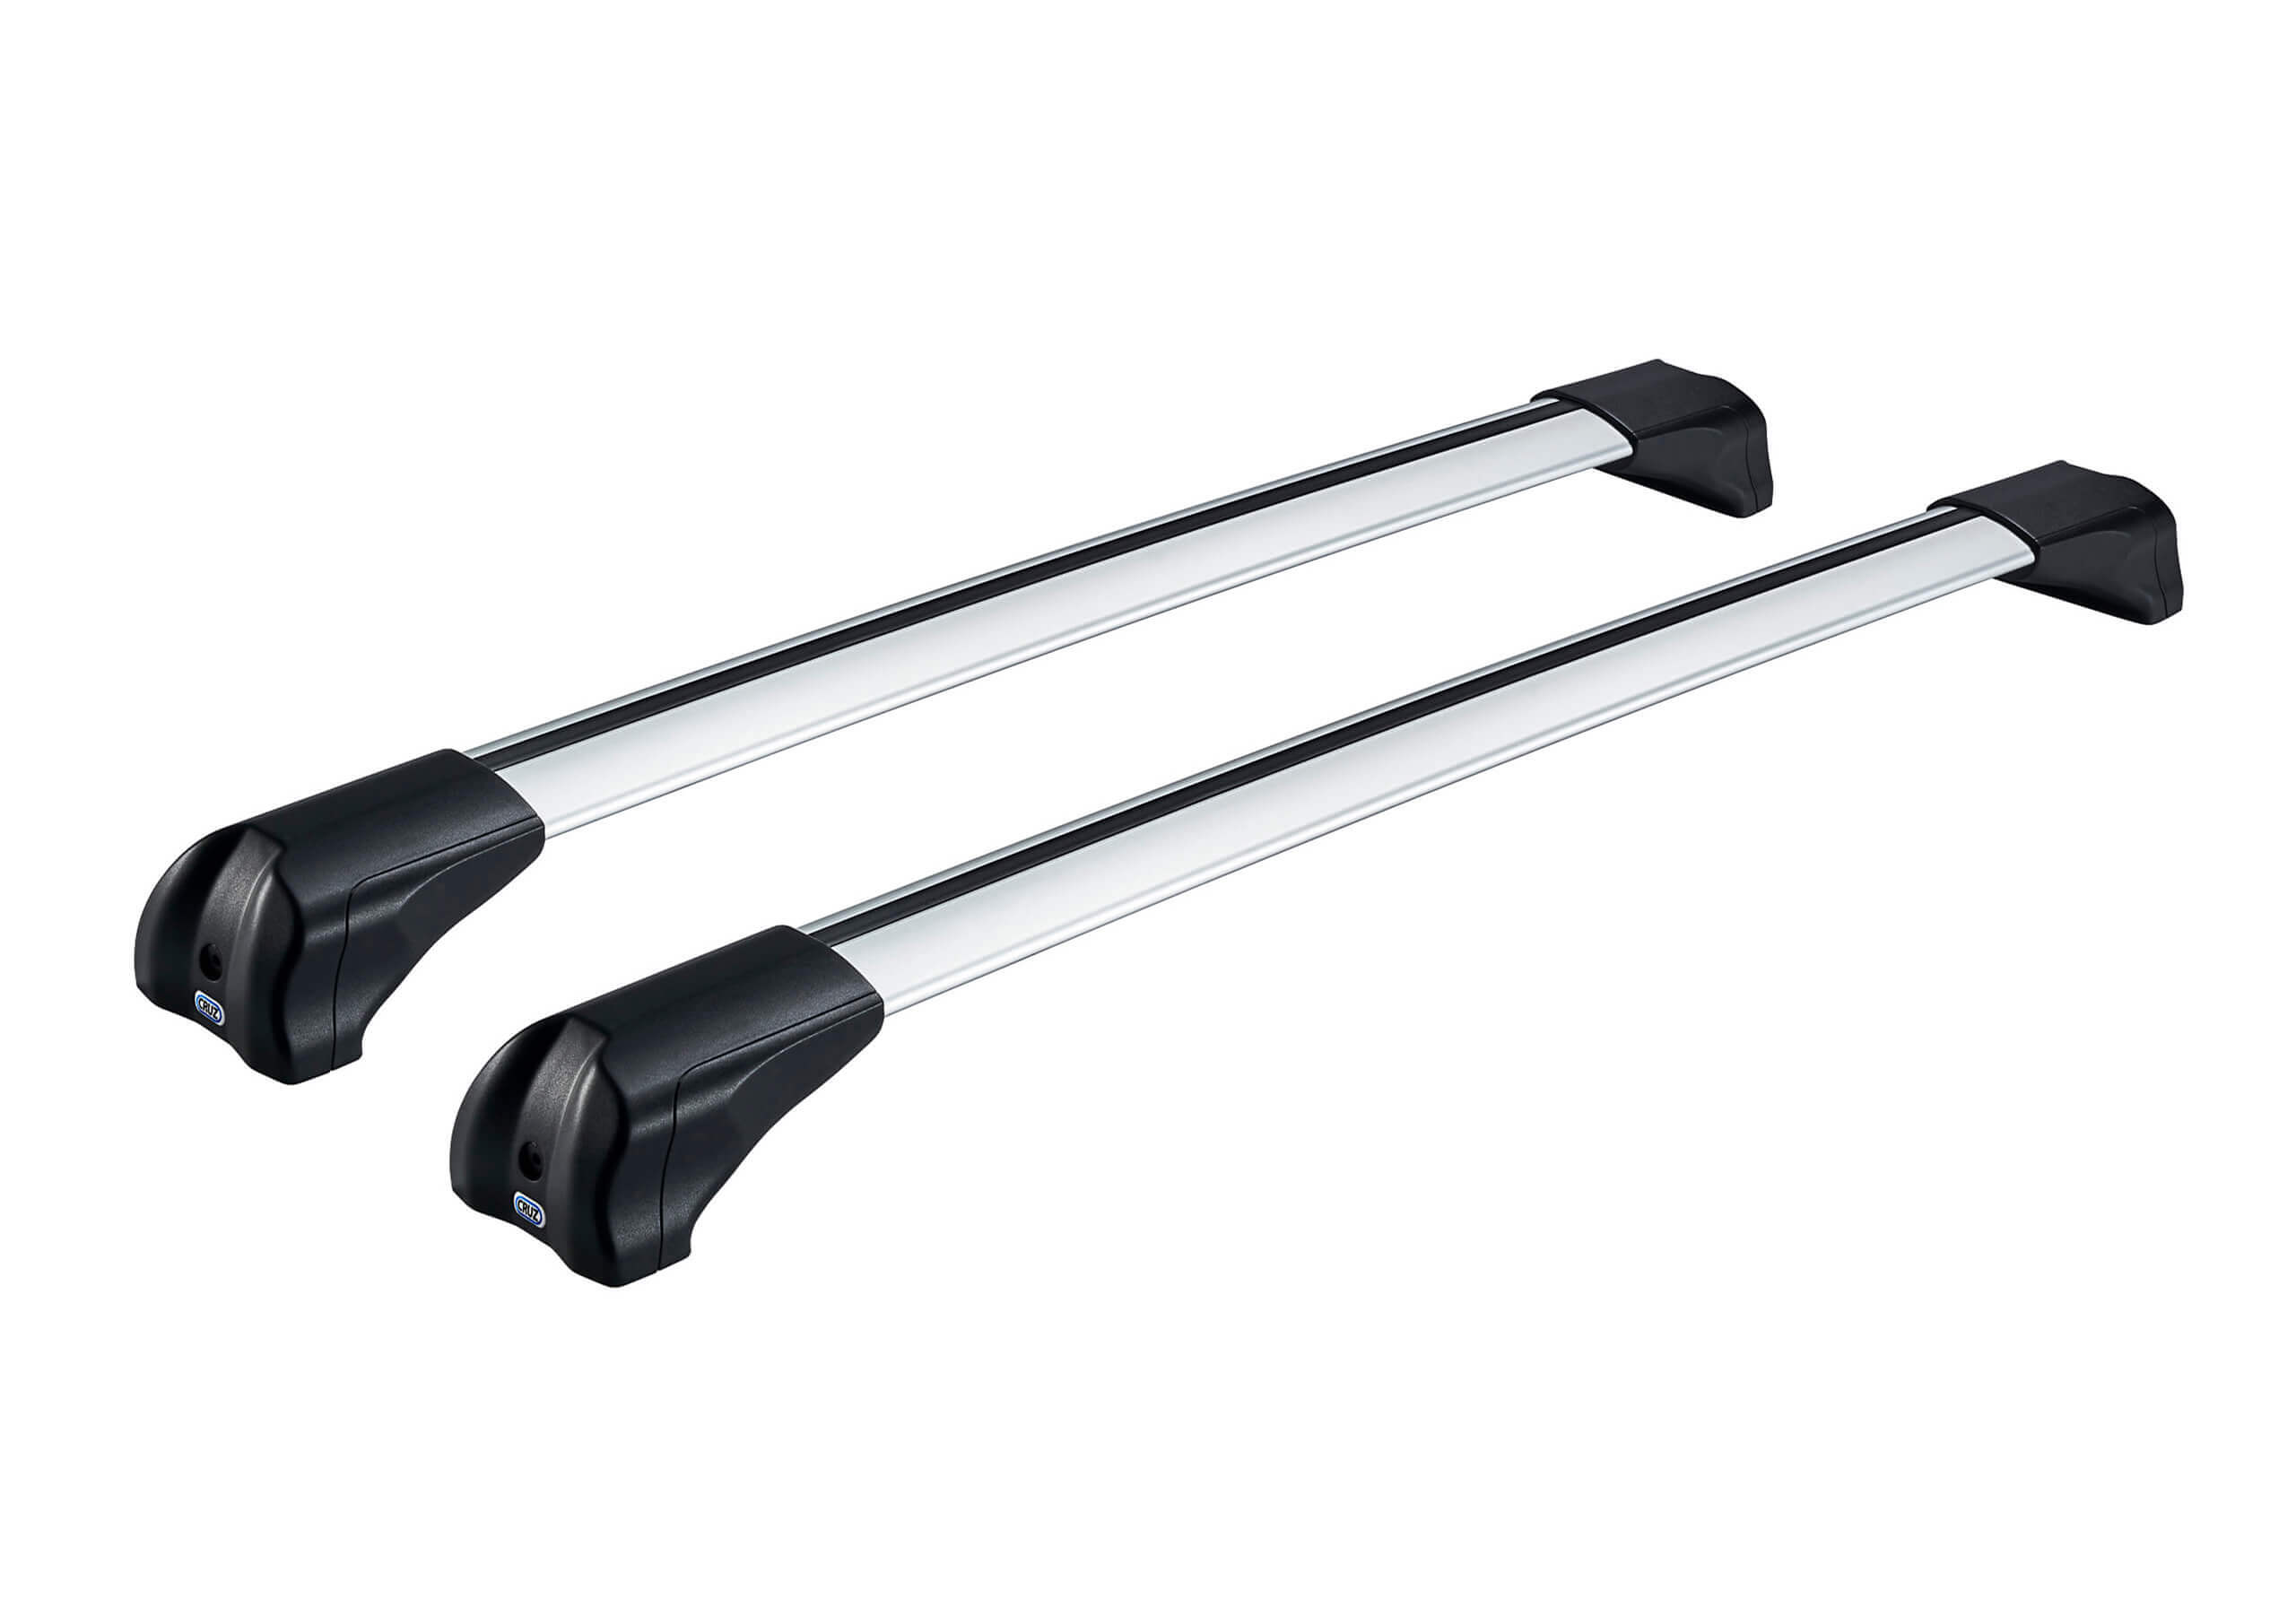 BMW 5 series four door saloon (1996 to 2001):CRUZ Airo Fuse silver aluminium roof bars with fitting kit 6016